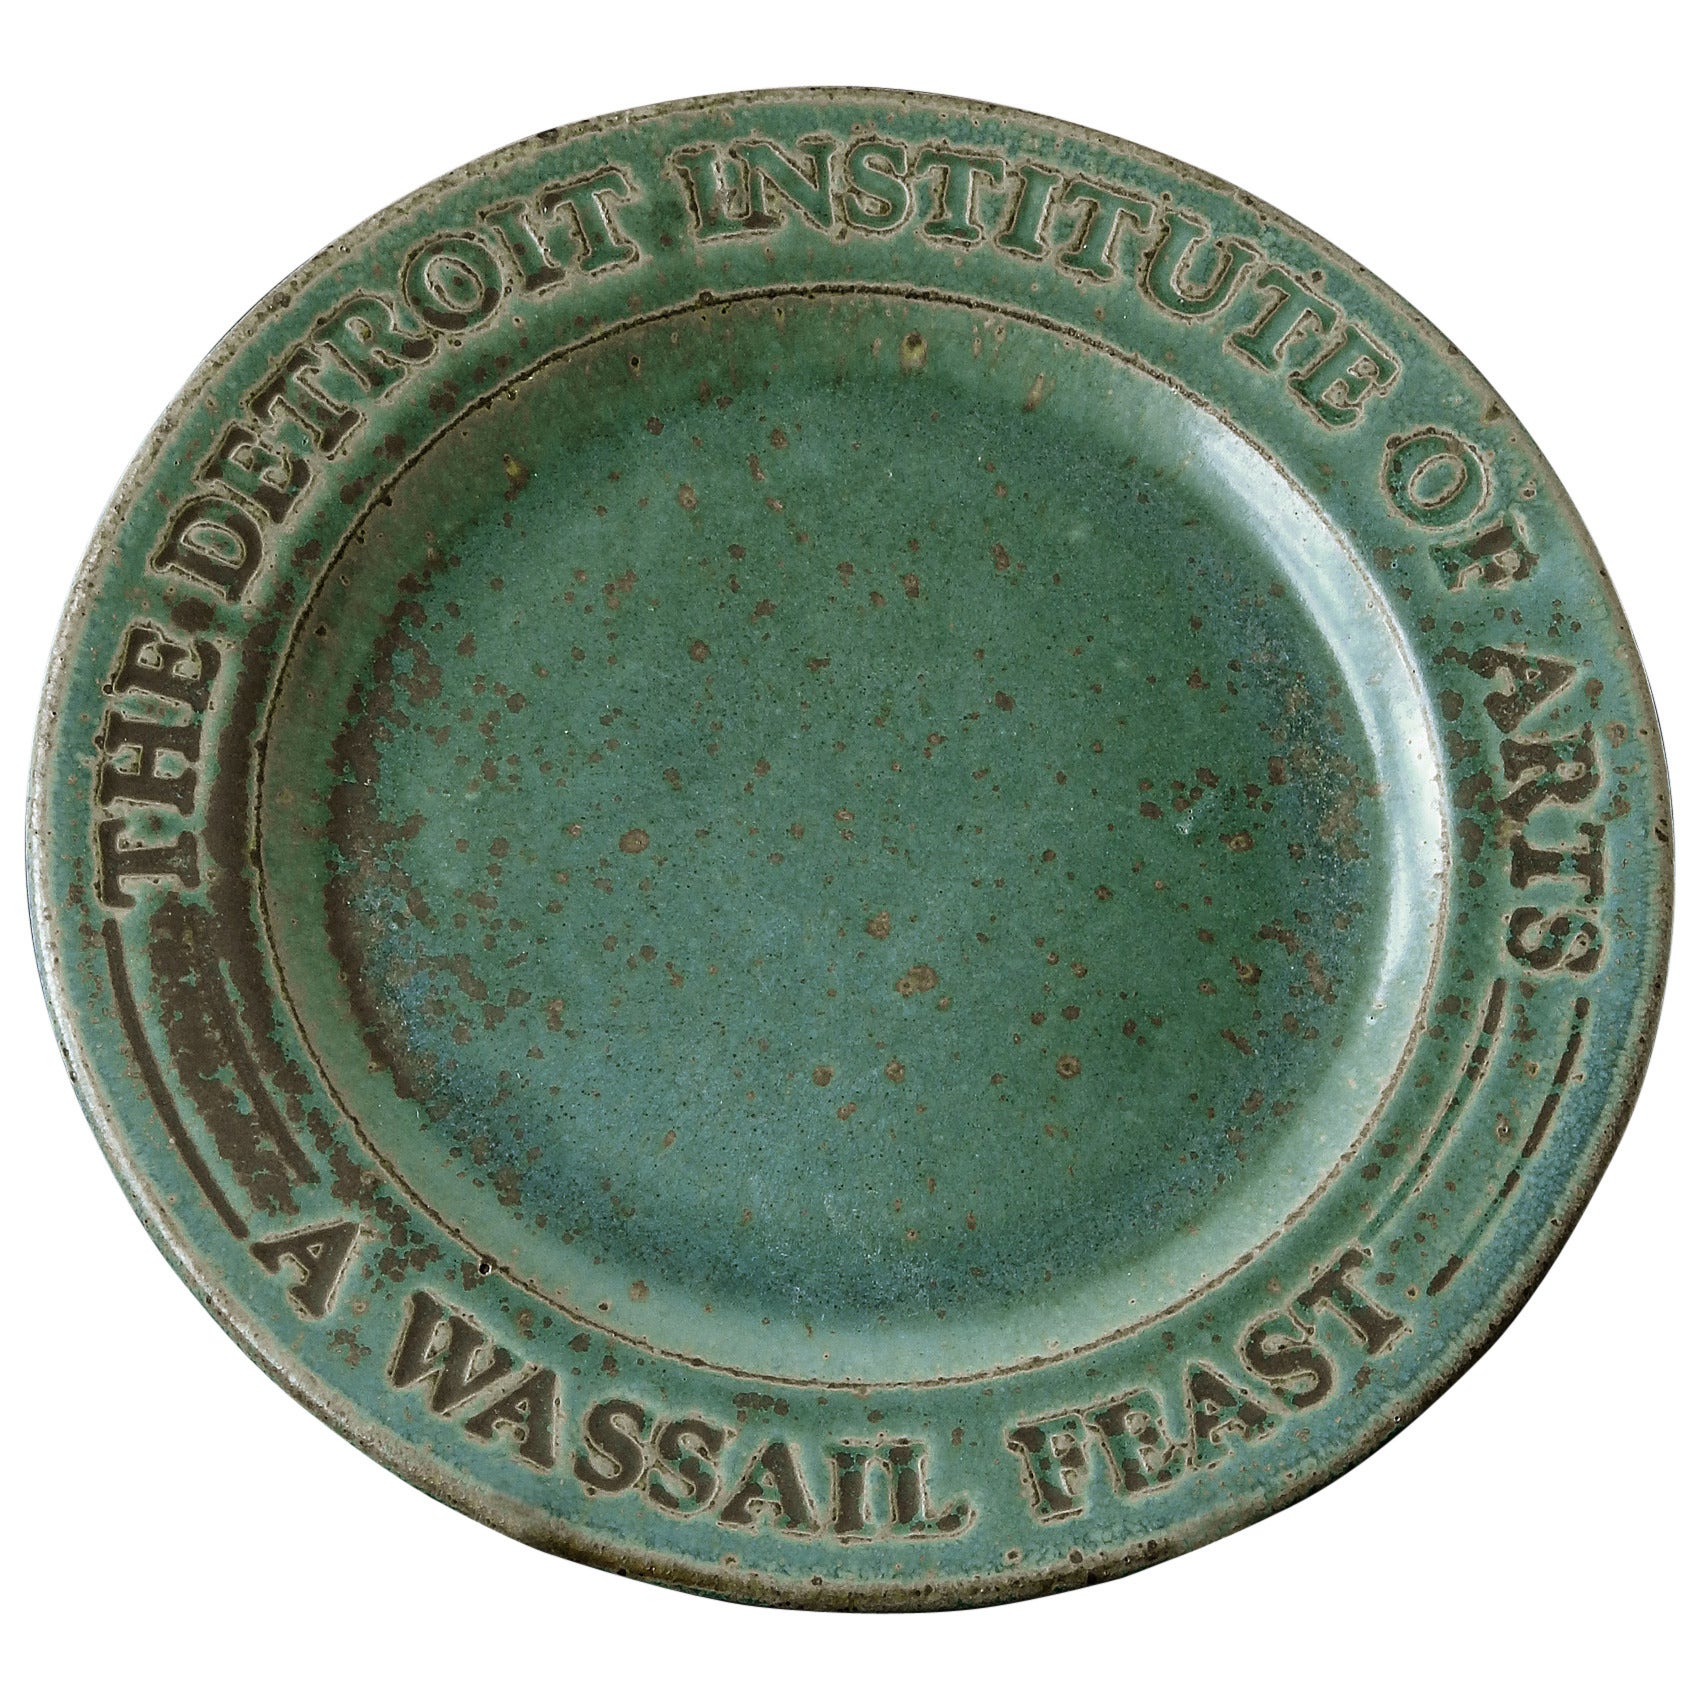 "Wassail Feast" Charger by Pewabic for Detroit Institute of Arts, 1982 For Sale